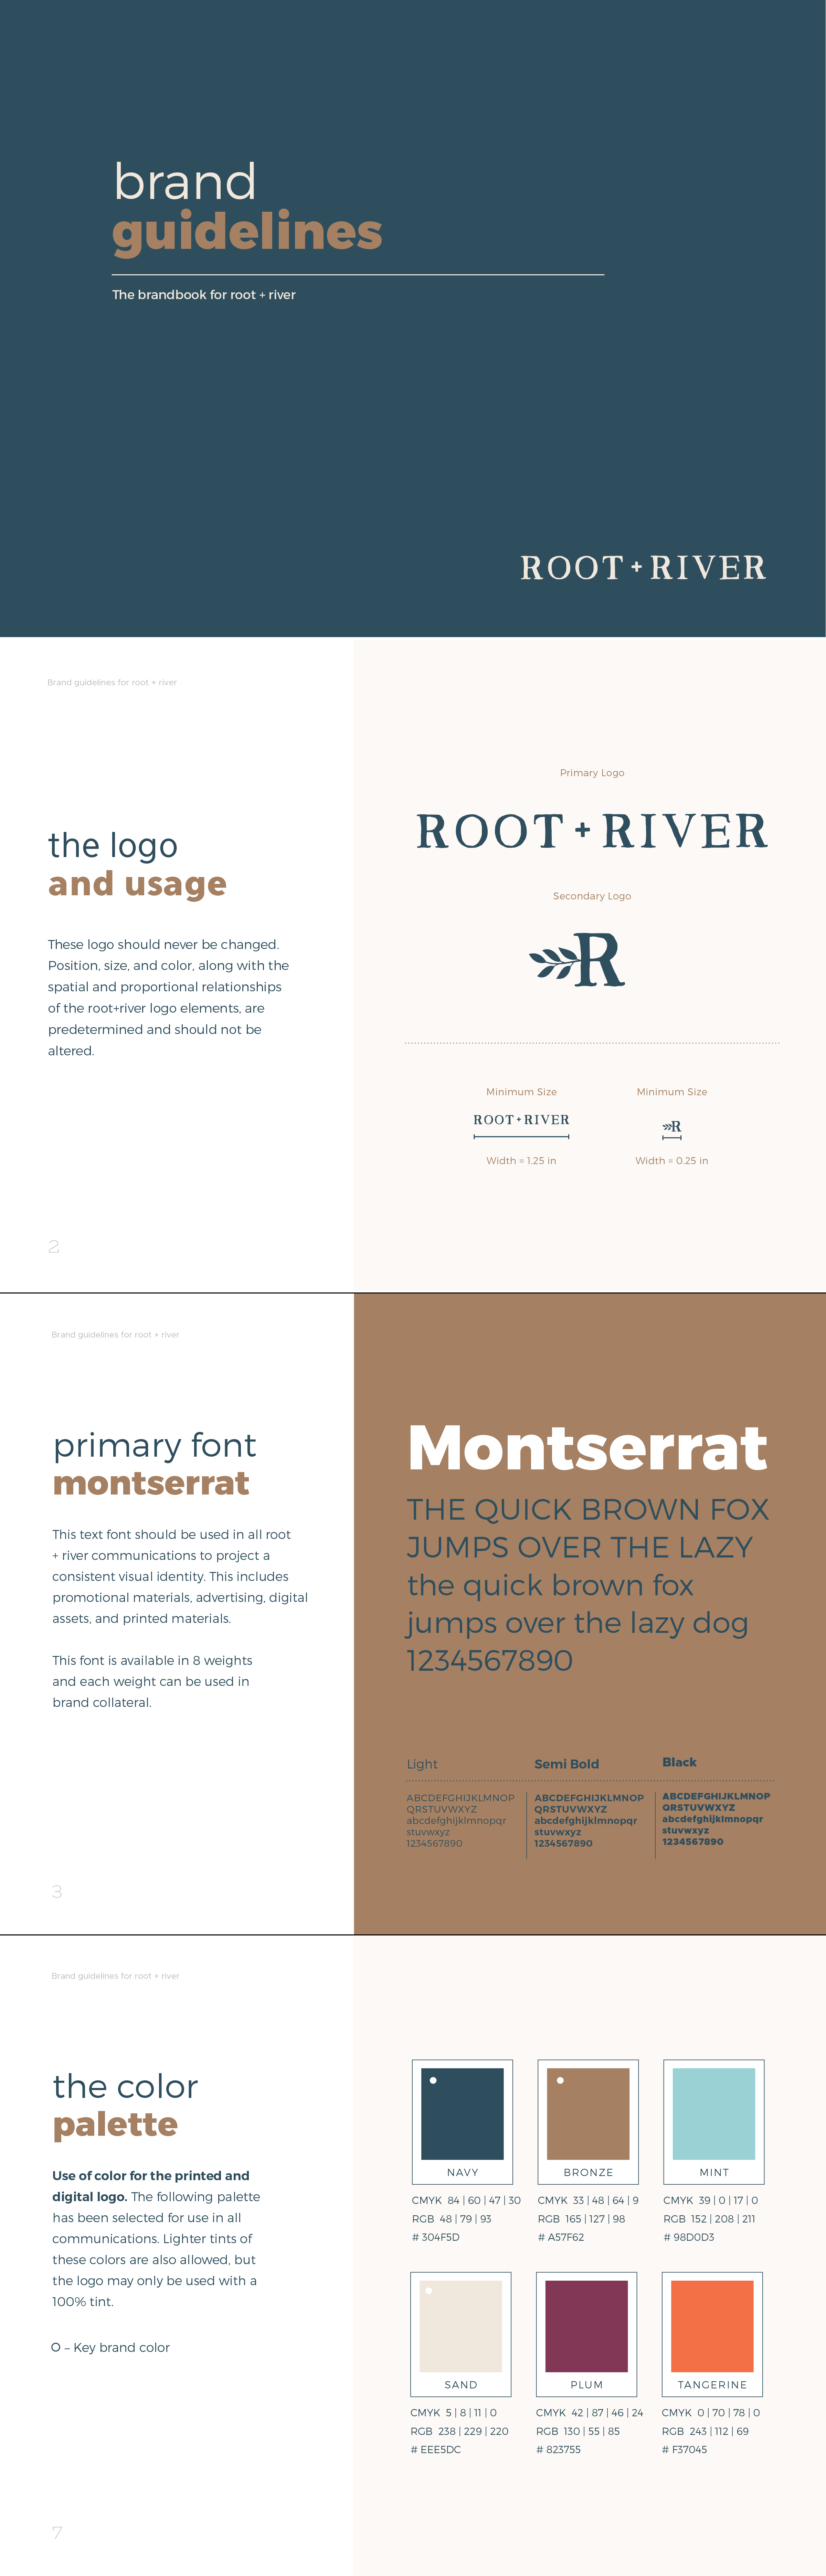 root + river Brand Style Guide example by Pace Creative Design Studio